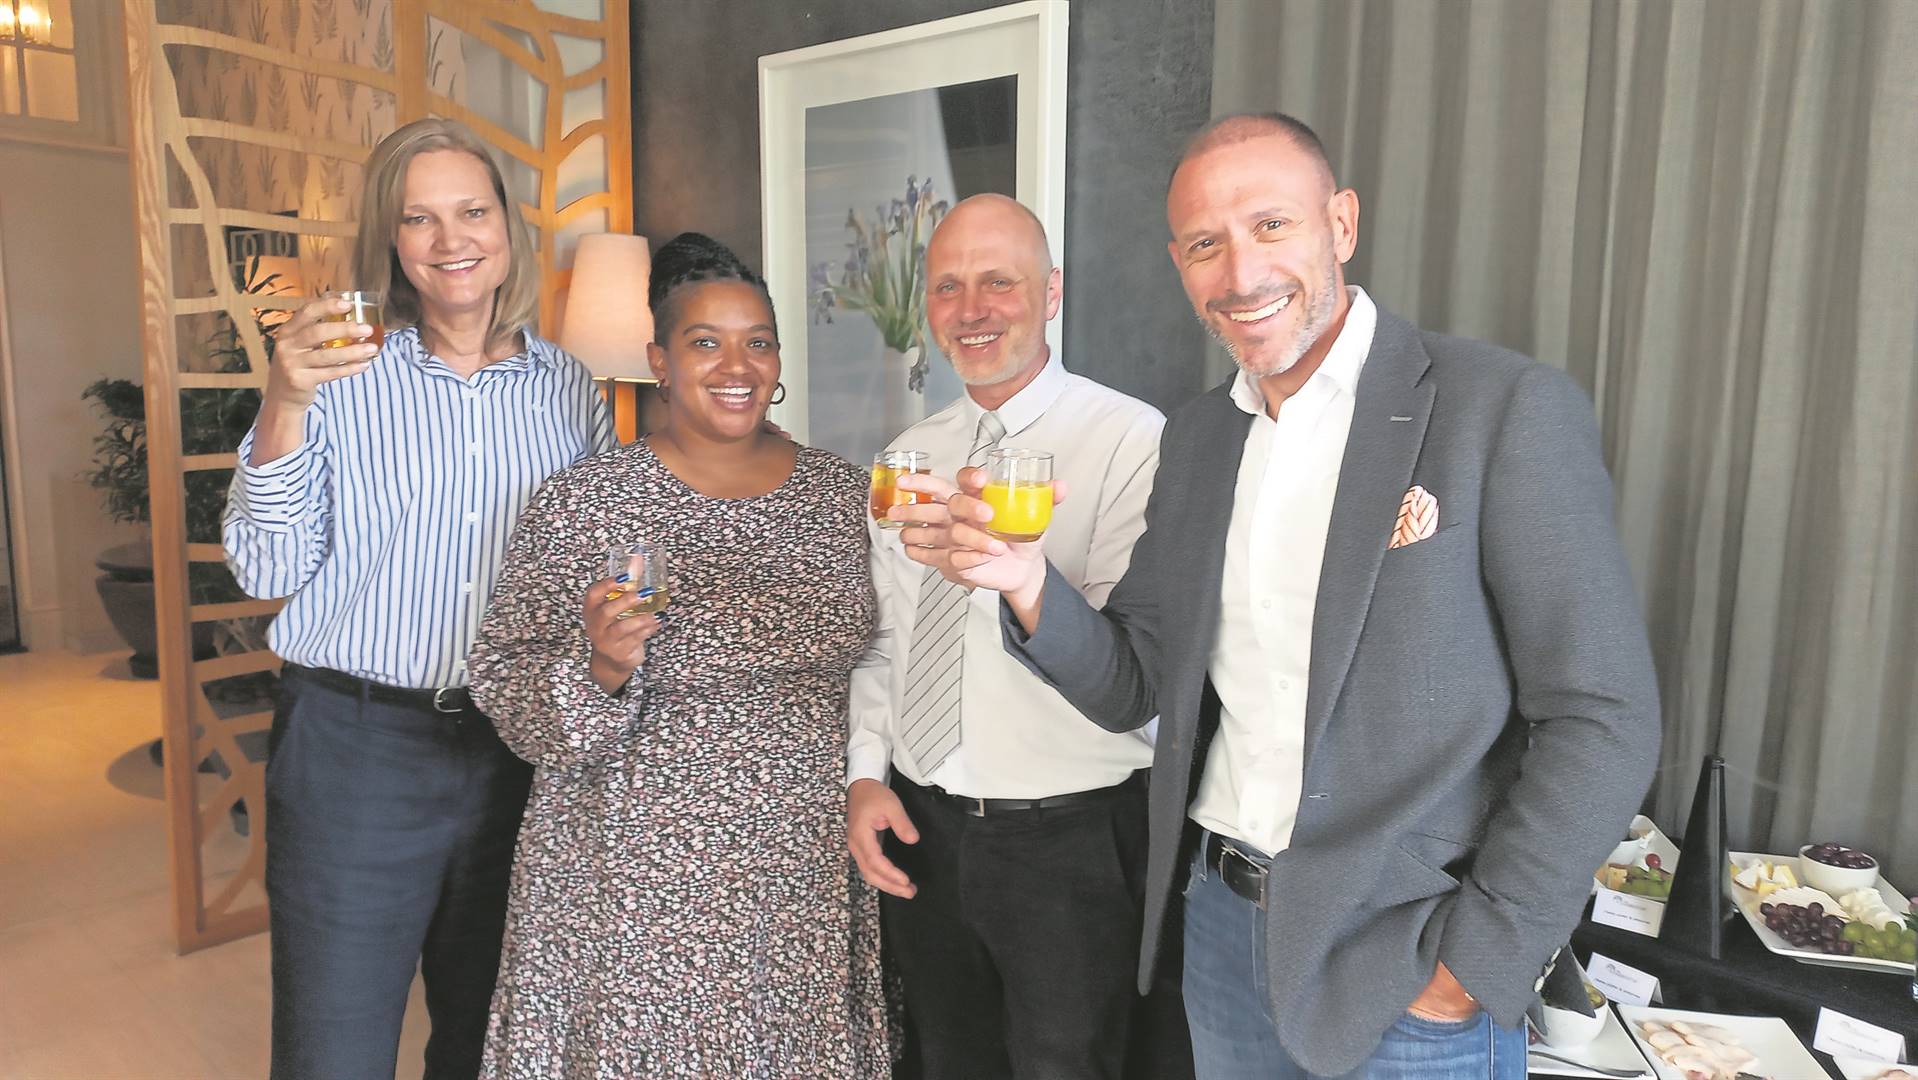 At U-Turn’s big Donor’s Breakfast at the Cellars Hohenort Hotel’s Greenhouse restaurant in Constantia are Ward 58 councillor Katherine Christie, Patricia van der Ross, Jean-Ray Knighton Fitt and the morning’s keynote speaker, Greg Bortz.